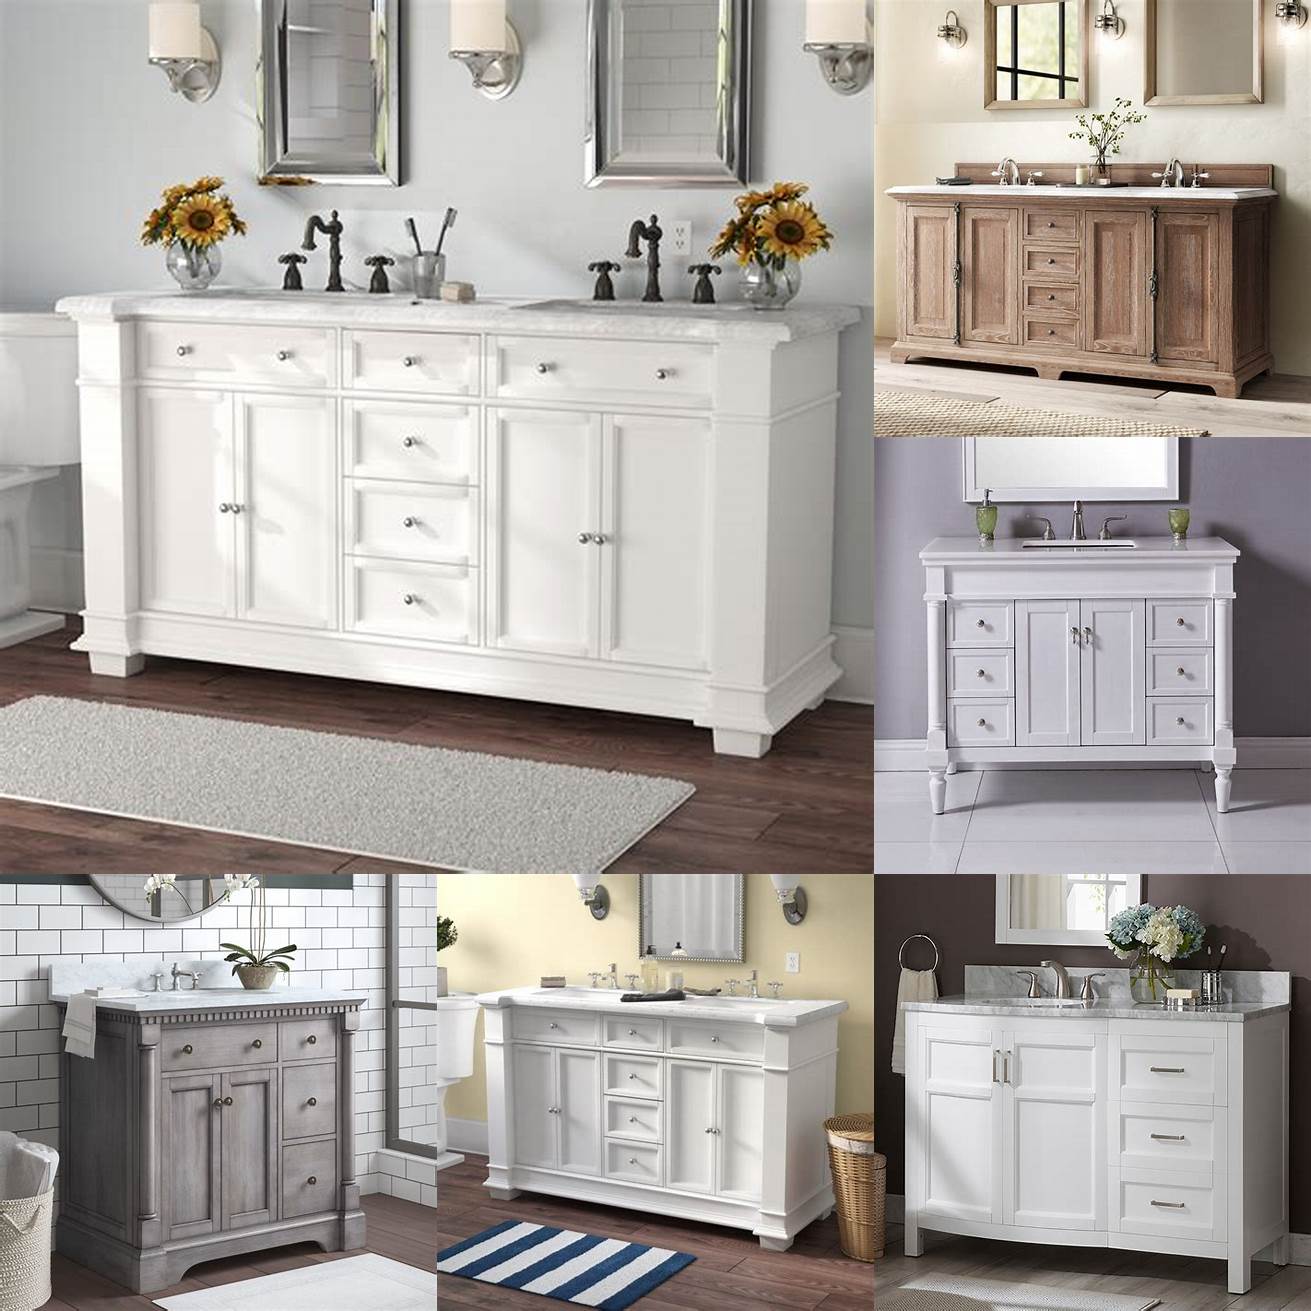 Online retailers Websites like Wayfair and Amazon offer a huge selection of bathroom vanities in all styles and materials